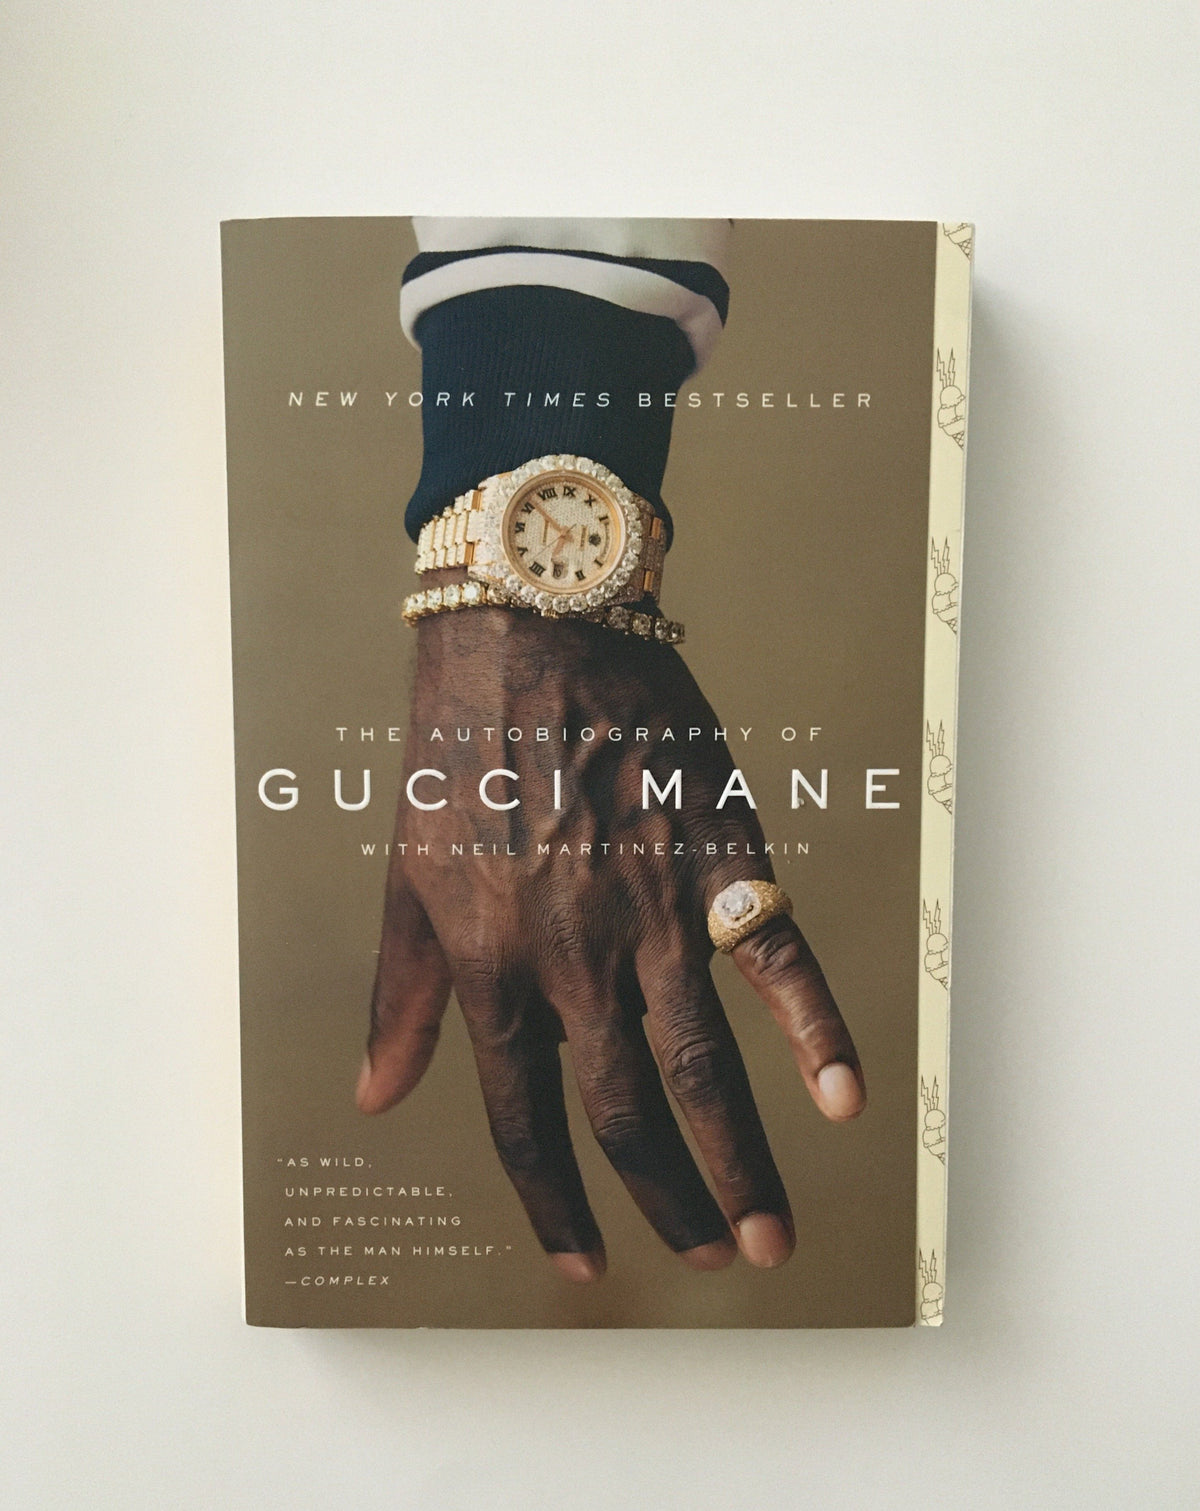 The Autobiography of Gucci Mane by Gucci Mane, book, Ten Dollar Books, Ten Dollar Books